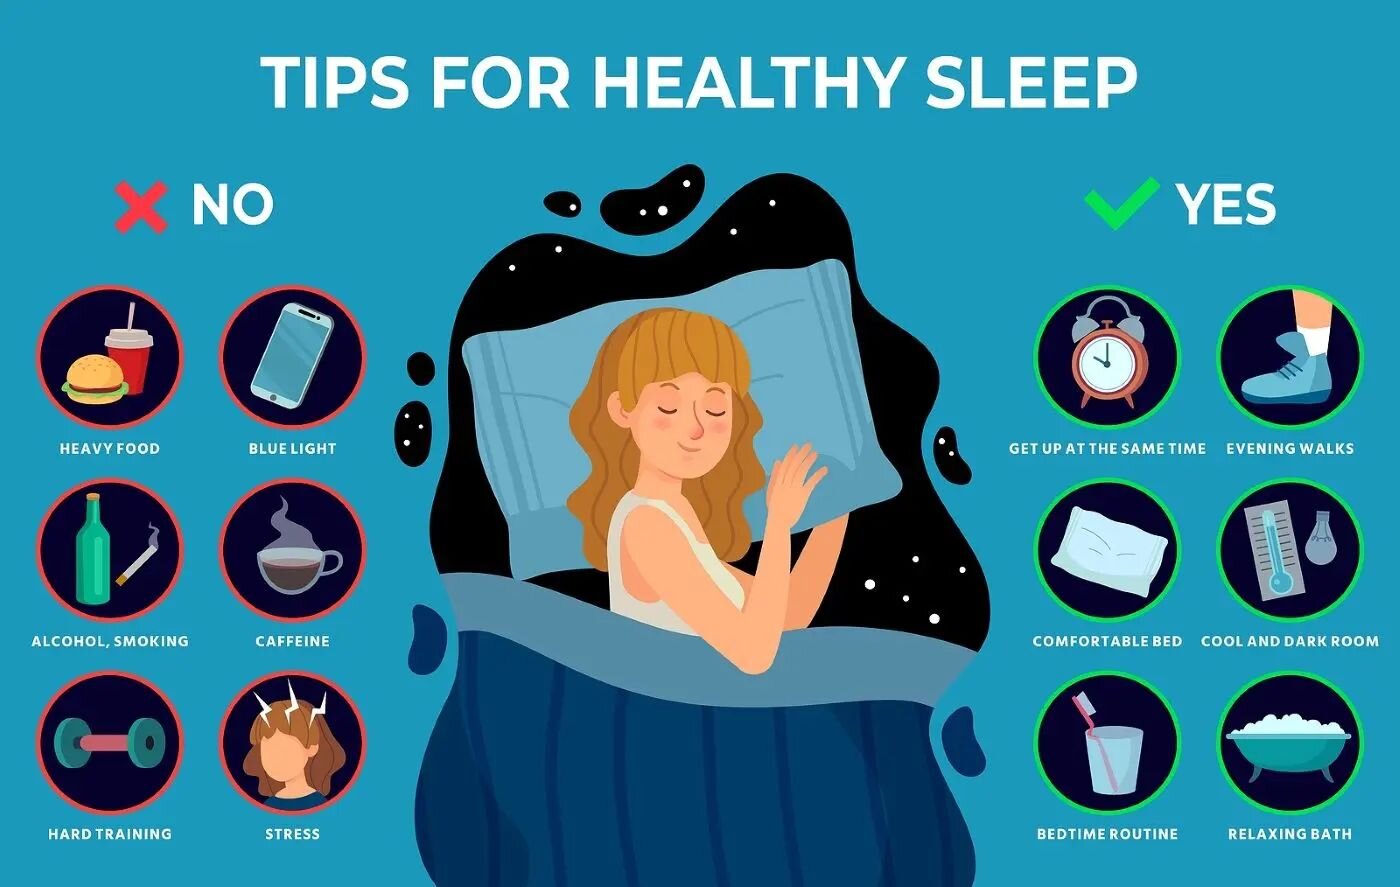 Struggling with mental health? Don't underestimate the power of healthy sleep habits! Check out our latest blog post to learn how quality sleep can improve your well-being and take the first step towards better mental health.